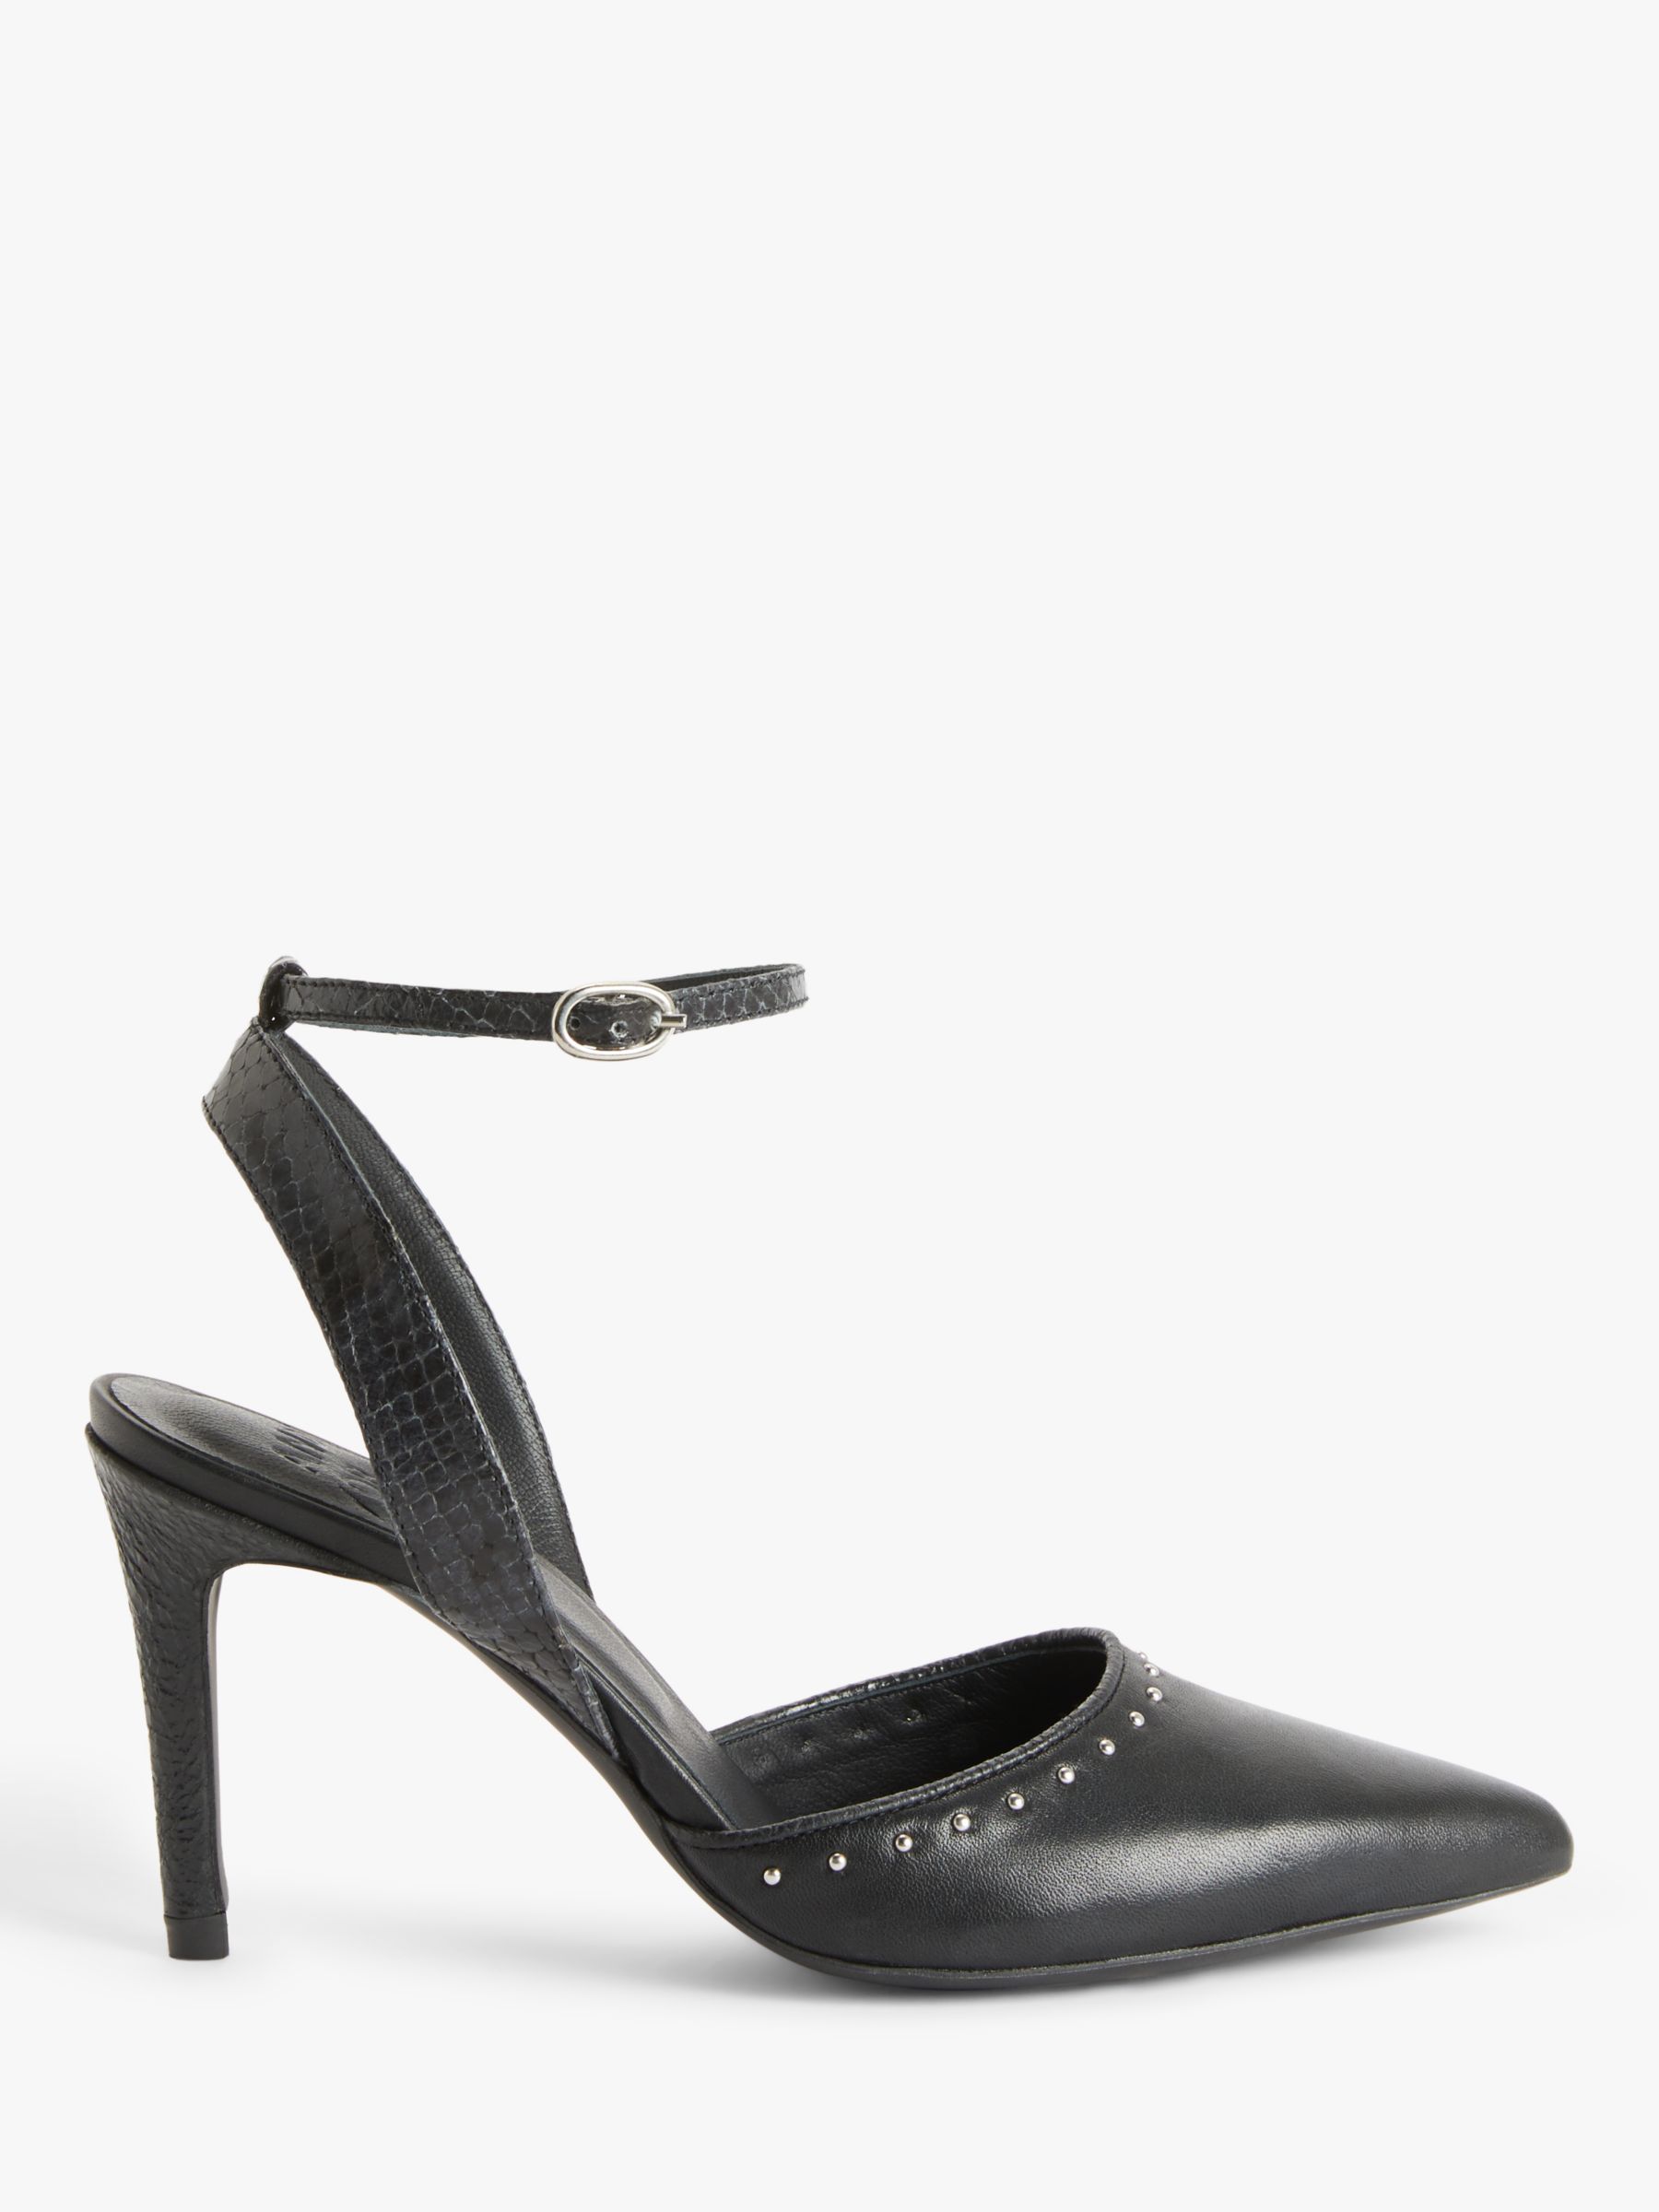 AND/OR Ailey Studded Court Shoes, Black